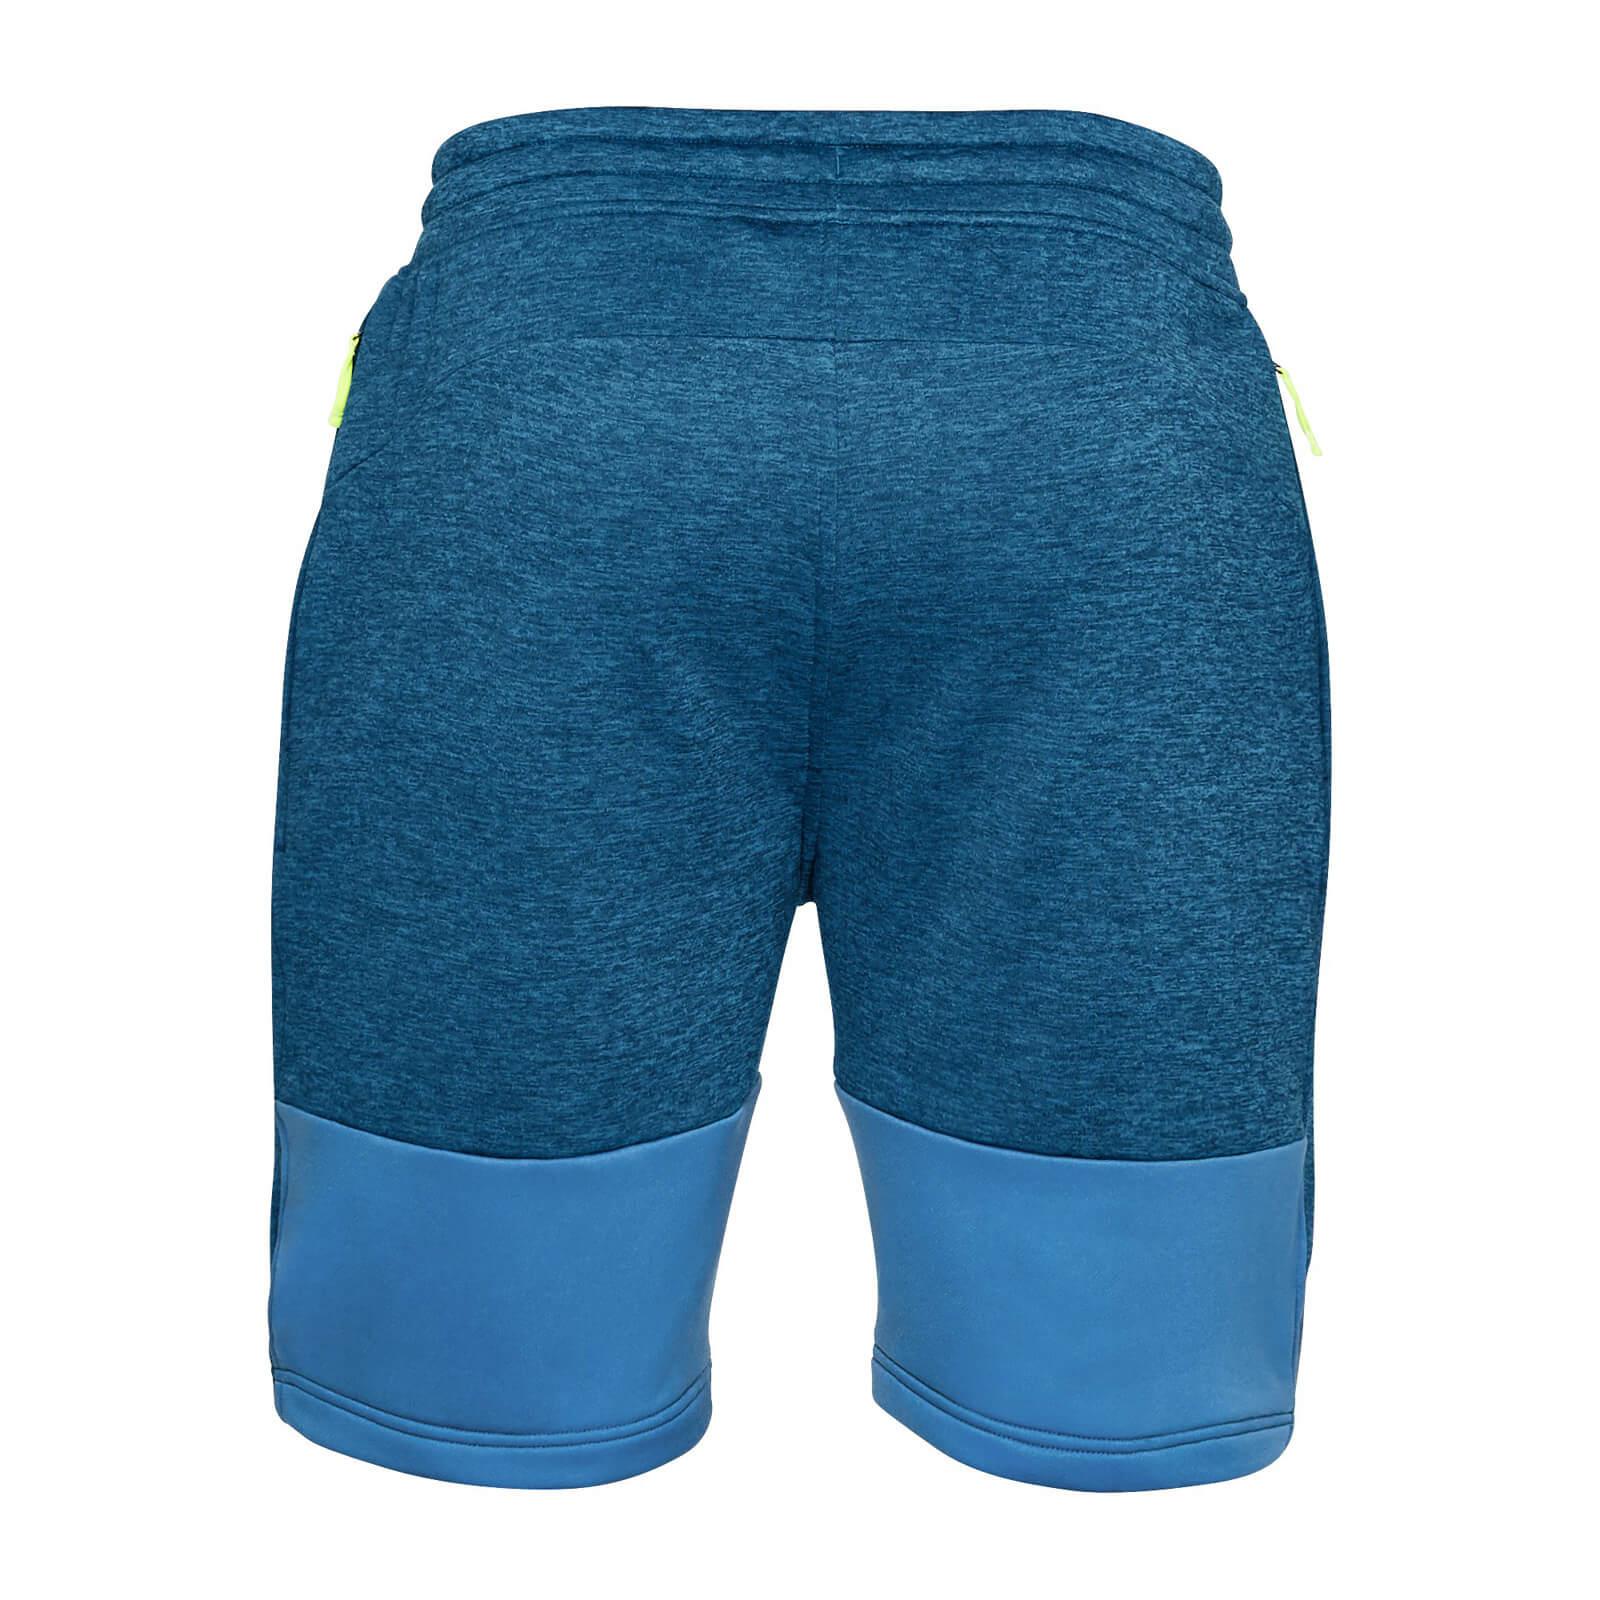 Under Armour Men's Ua Mk1 Terry Shorts in Blue for Men - Lyst